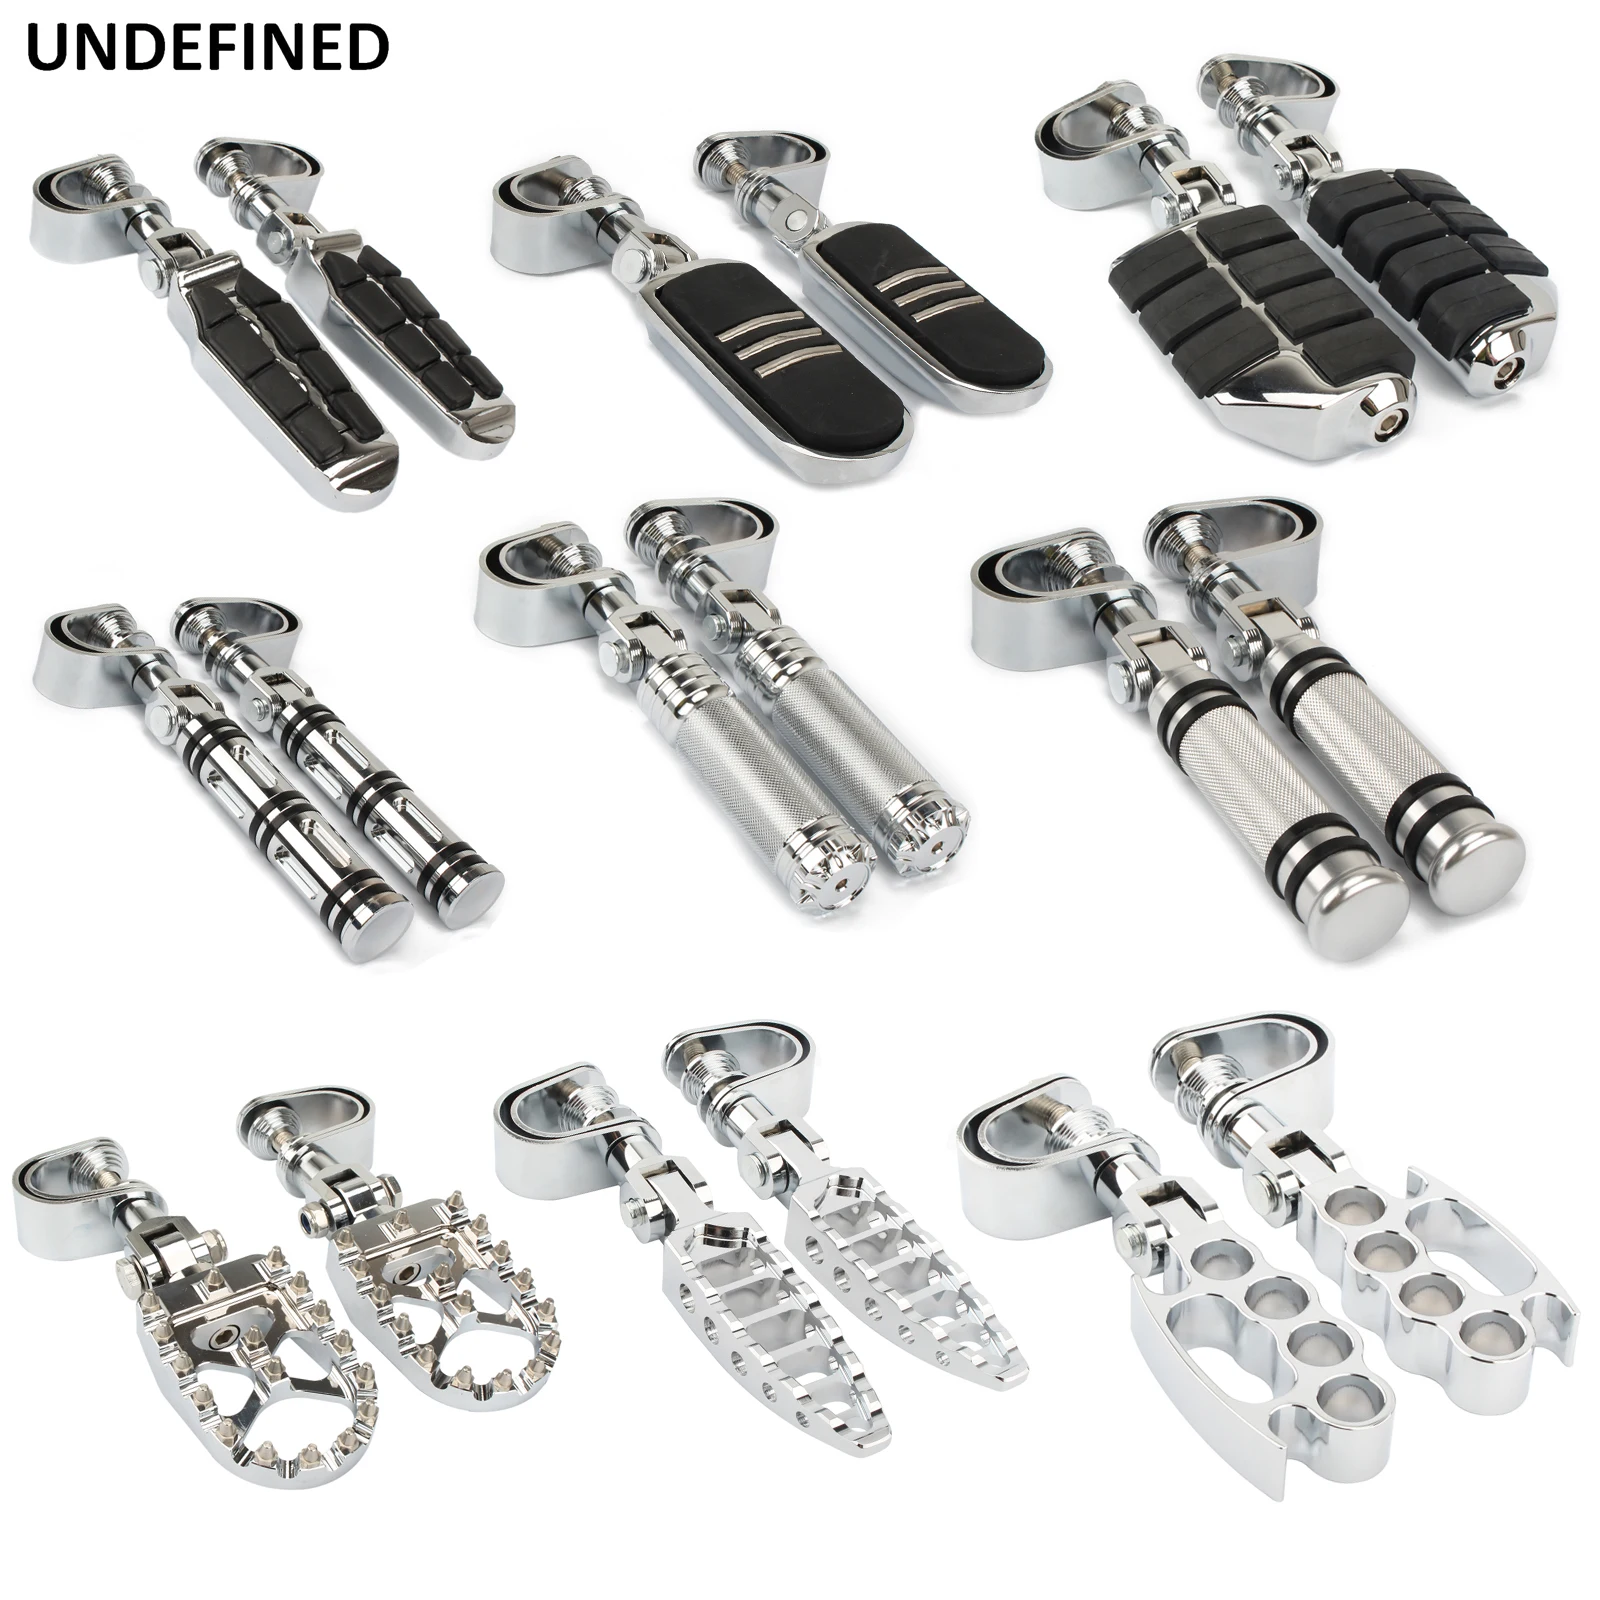 25mm-32mm Motorcycle Highway Pegs Crash Bar Clamp Mount Engine Guard Foot pegs Footrest For Harley Sportster Softail Chopper